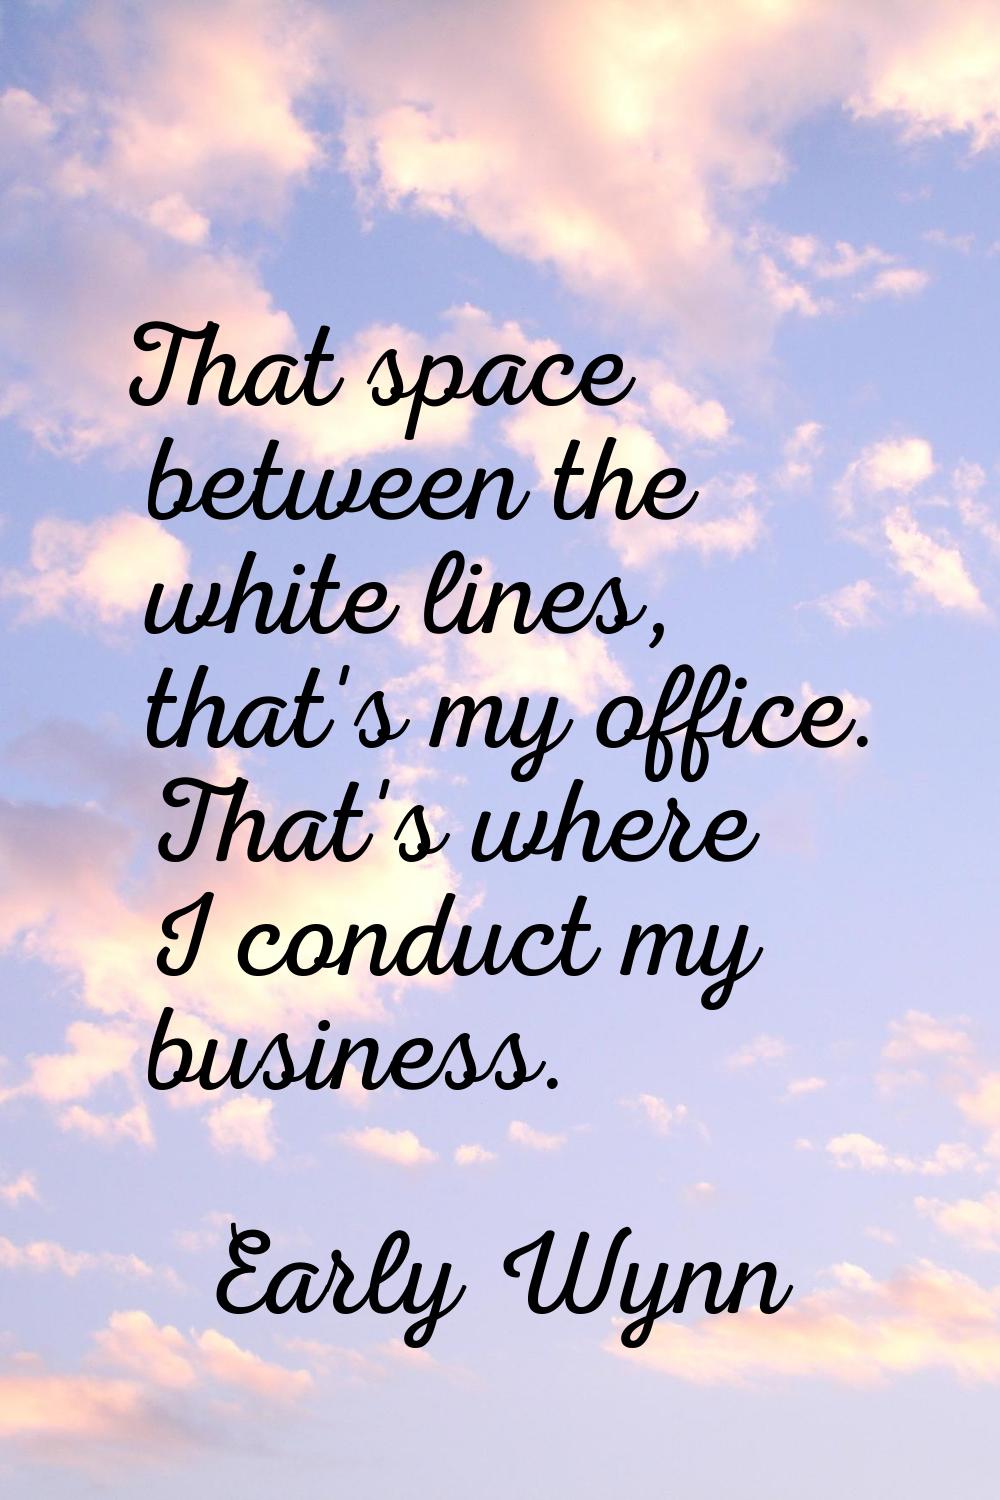 That space between the white lines, that's my office. That's where I conduct my business.